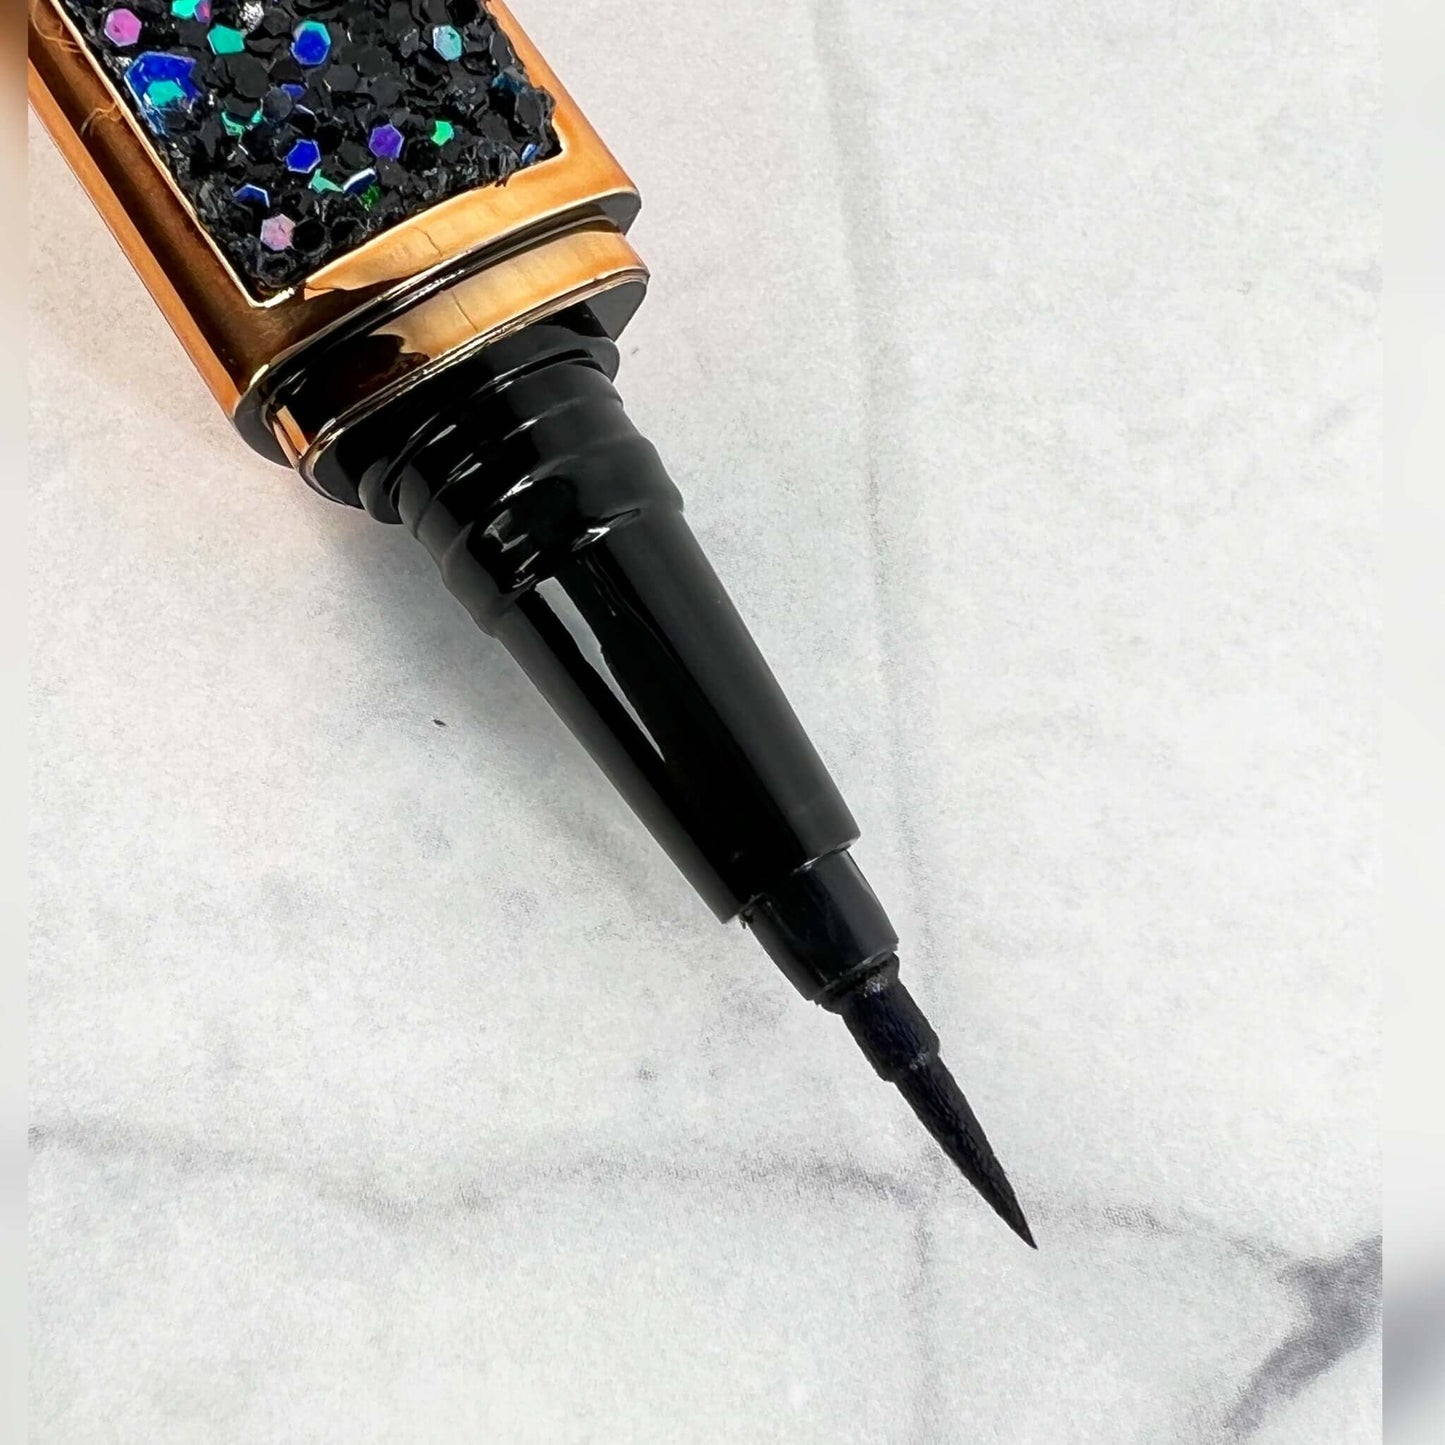 Bold and Luscious Brand Diamond Status Magic Lash is an Adhesive Eyeliner pen. The ink in this pen is black. in this picture, you see the fine tip making it easy to apply like traditional eyeliner then apply your lashes directly to the liner.